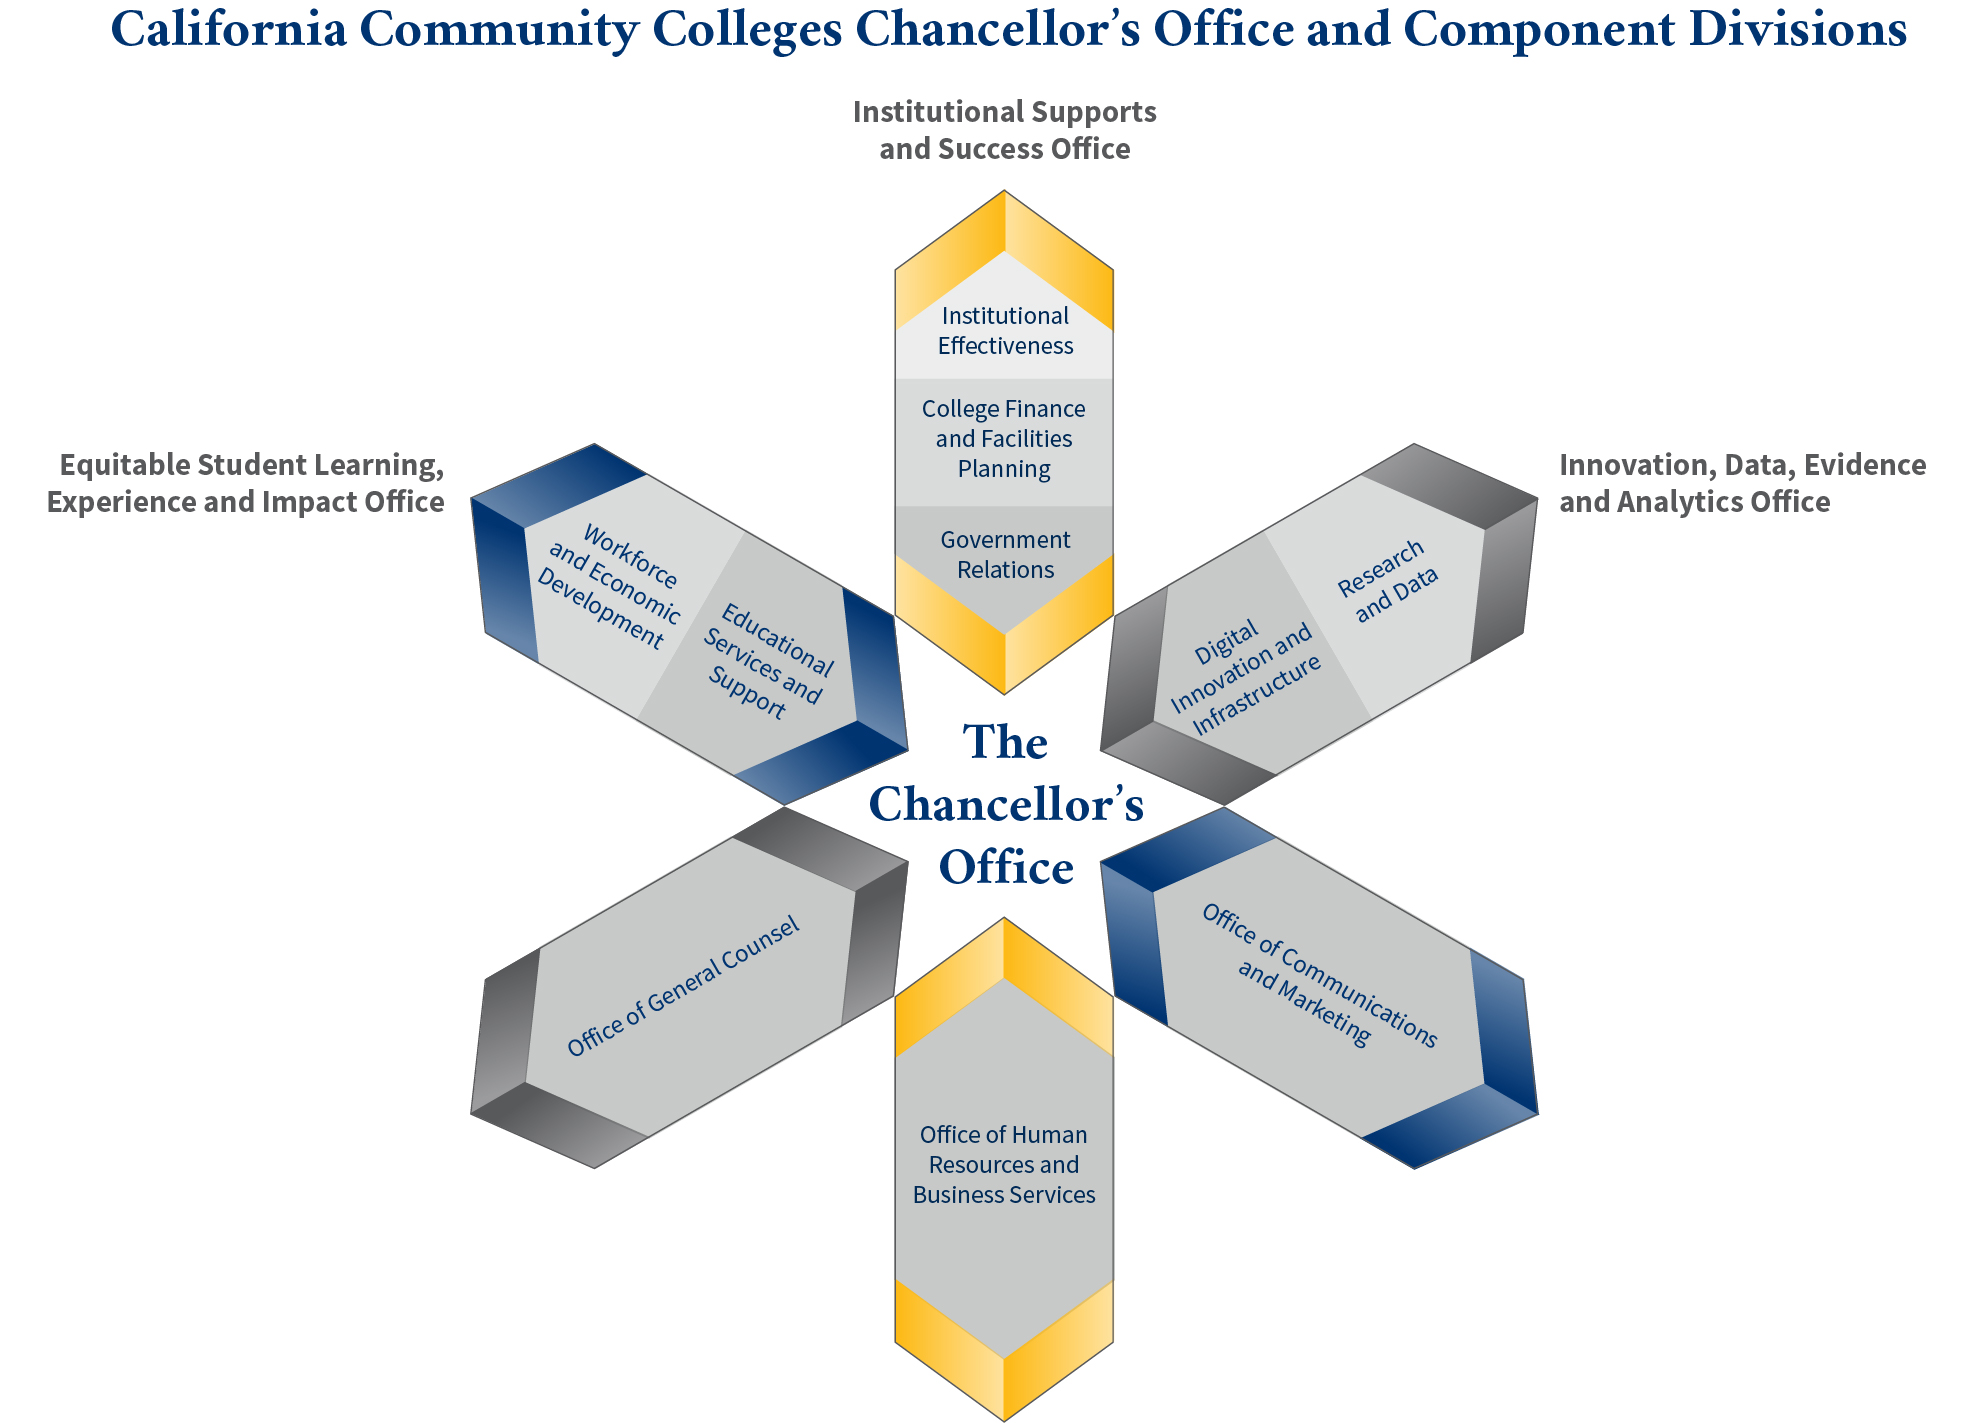 Offices and Divisions represented in a star format with the Chancellor's Office at the center